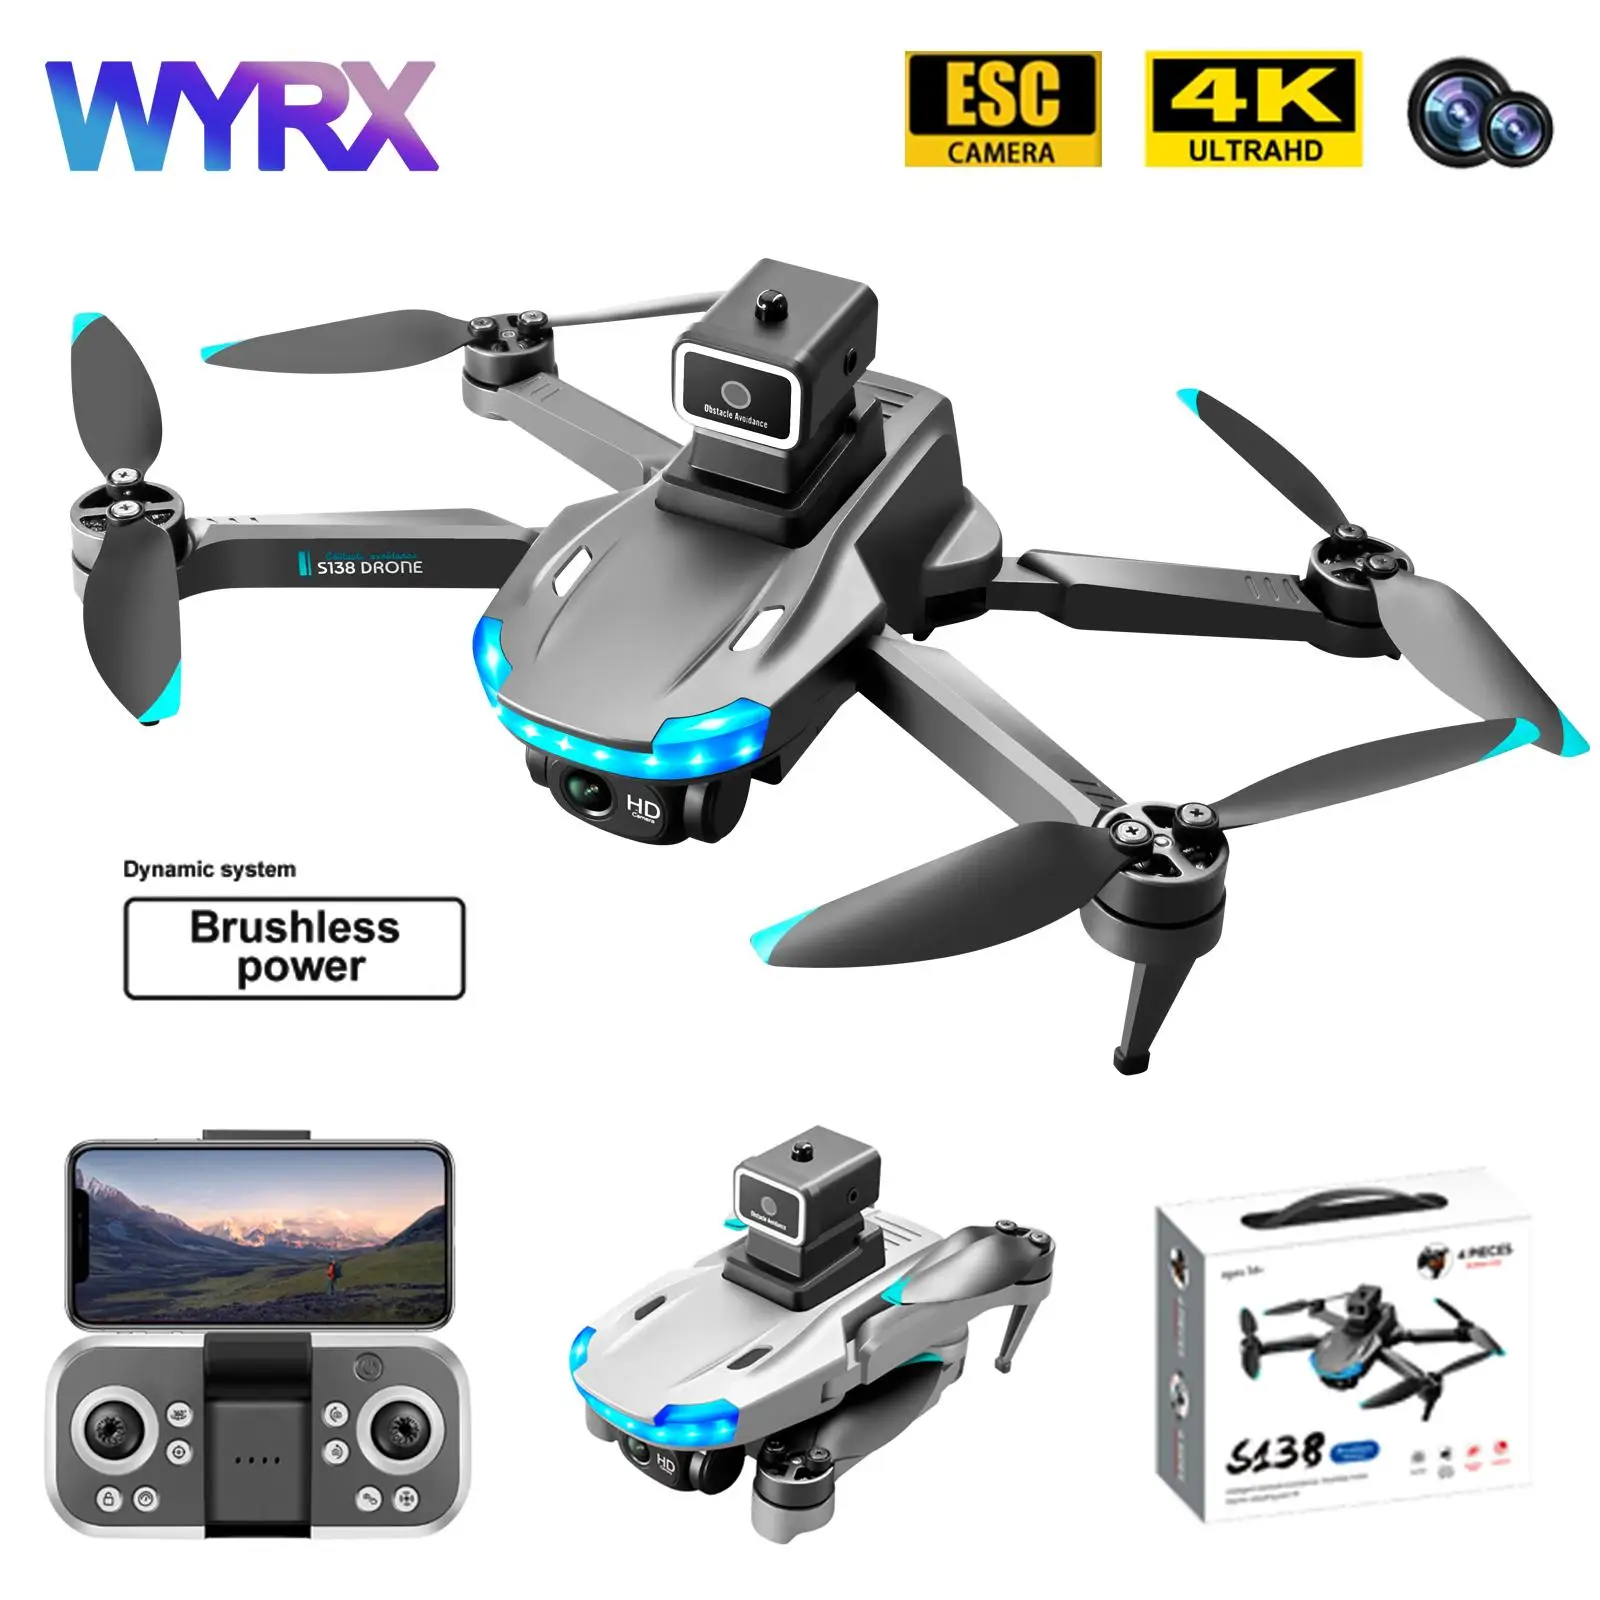 WYRX NEW S138 4K Dual Camera UAV Foldable Optical Flow RC Helicopter FPV Aerial Photography Brushless Quadcopter Toy Drone Gift